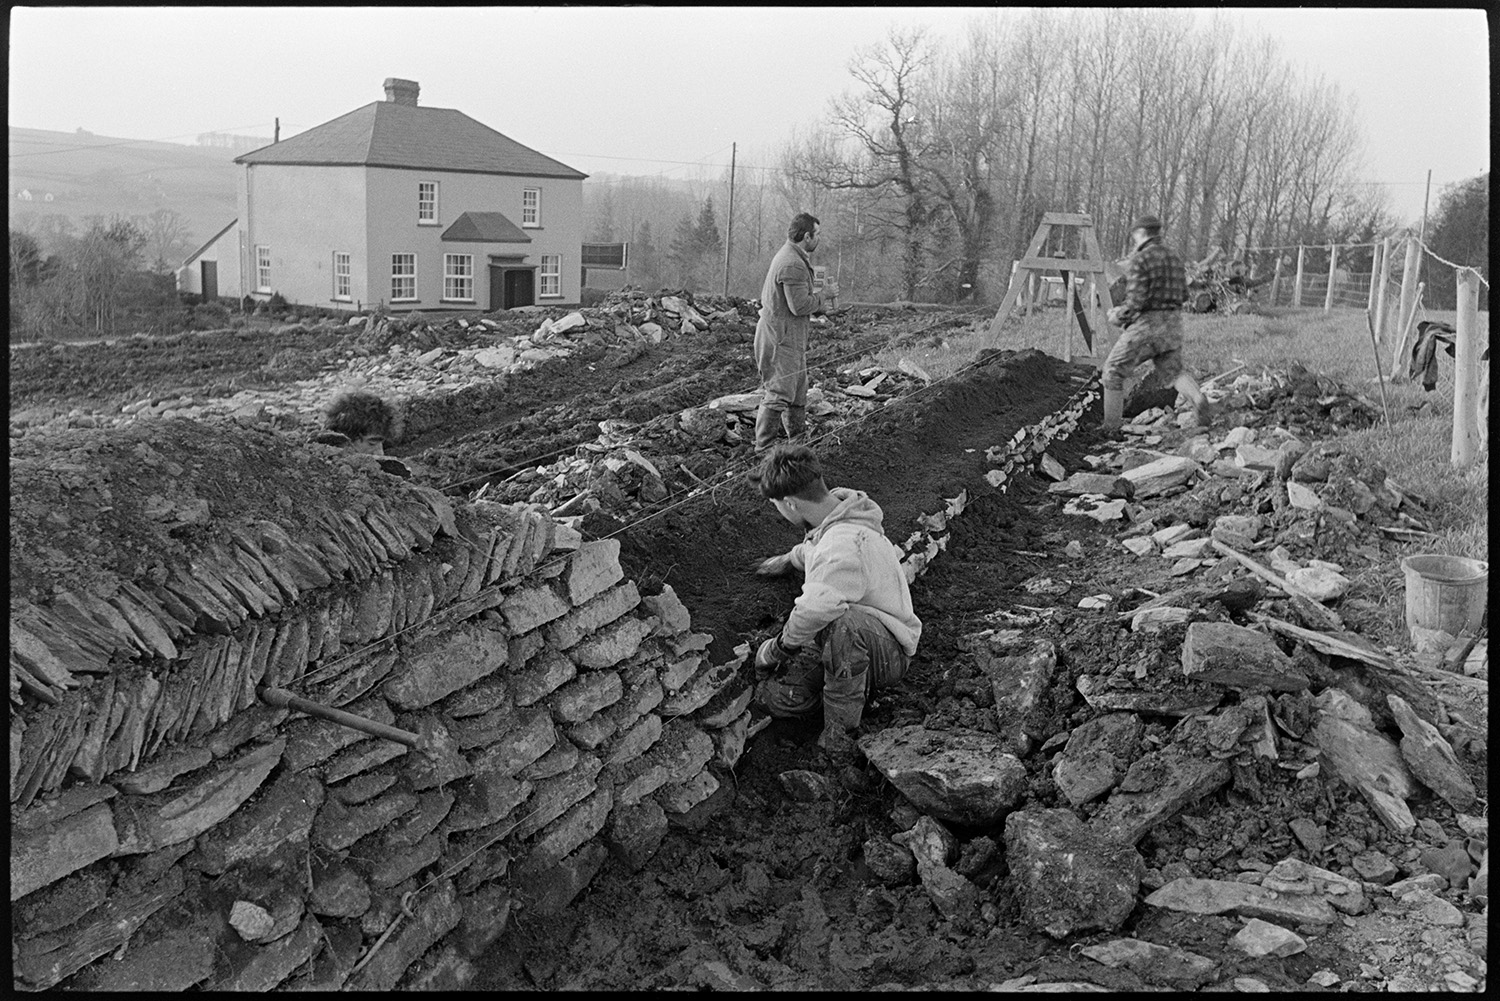 Men building dry stone wall beside road. 
[Four men building a dry stone wall at Leigh Cross, Chulmleigh. A house can be seen in the background.]